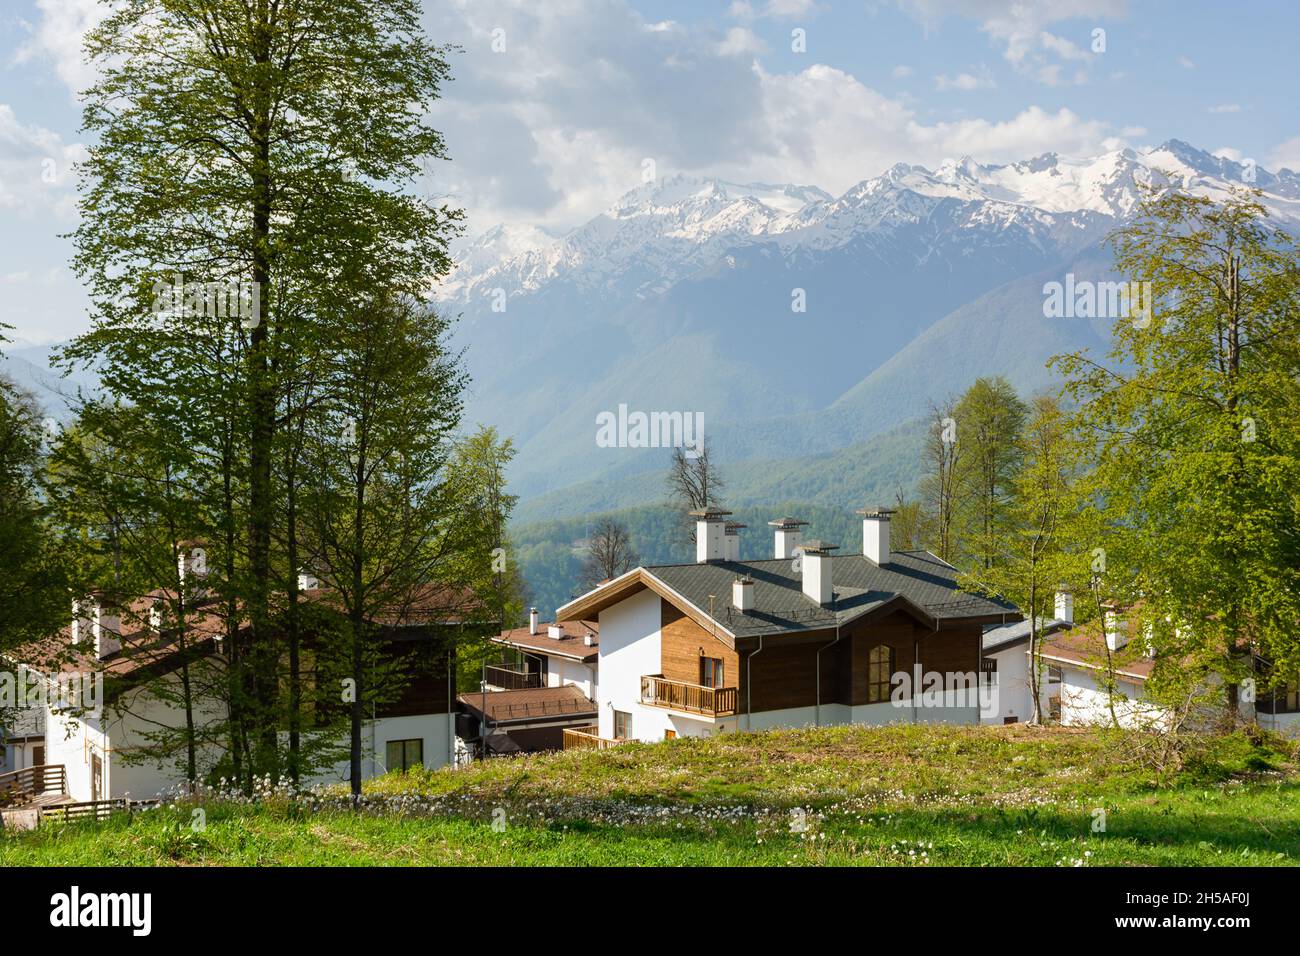 Sochi Krasnodar Territory village of Rosa Khutor on April 29, 2018. View of wooden guest houses and mountains. Beautiful sunny spring landscape at a p Stock Photo